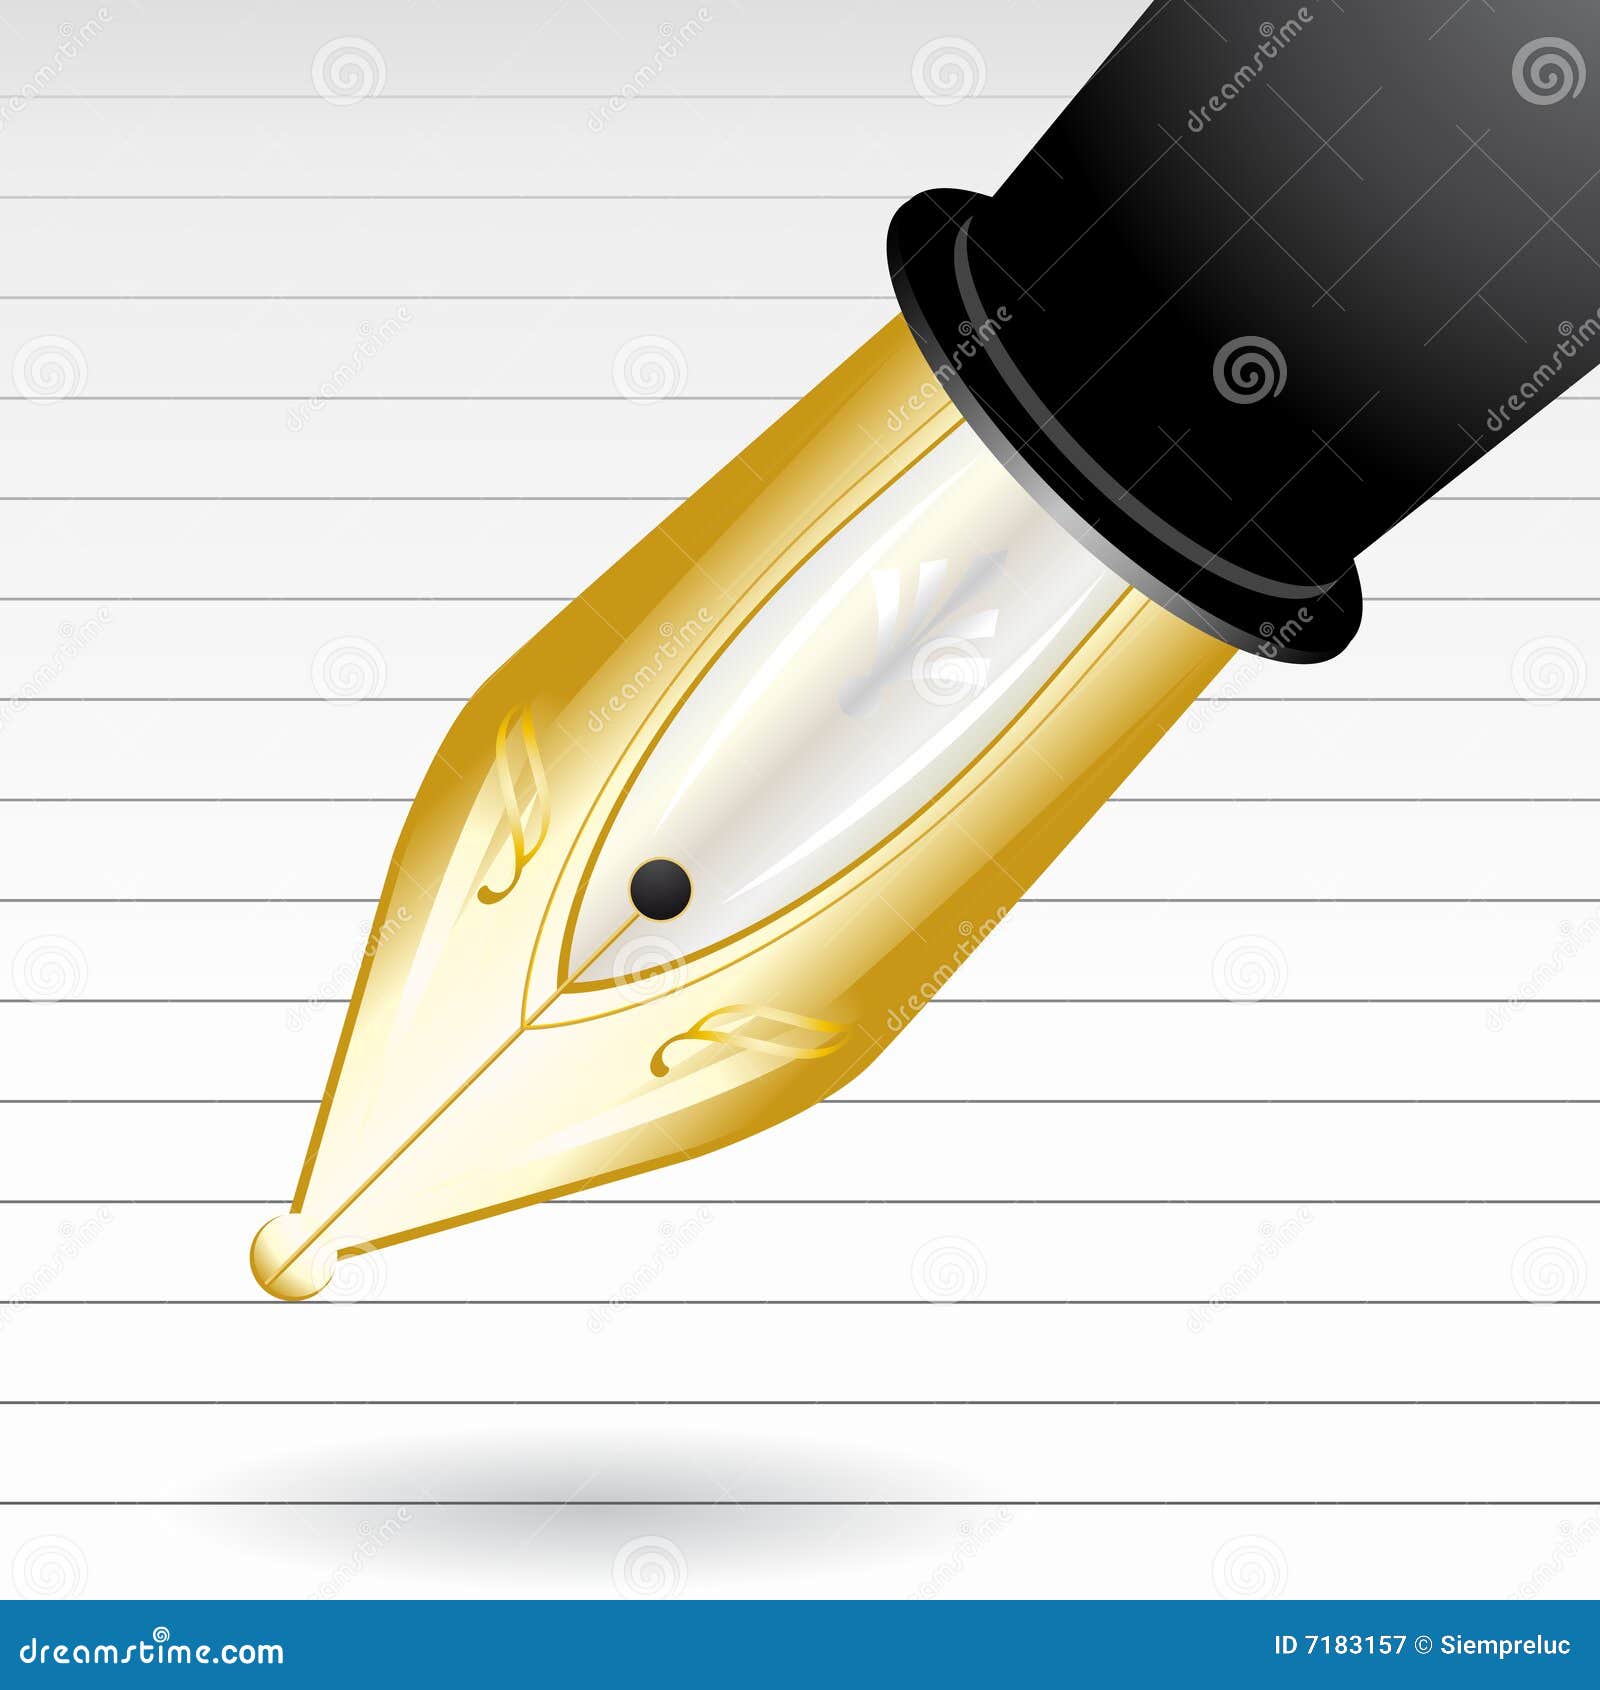 1,265,663 Writing Pen Images, Stock Photos, 3D objects, & Vectors